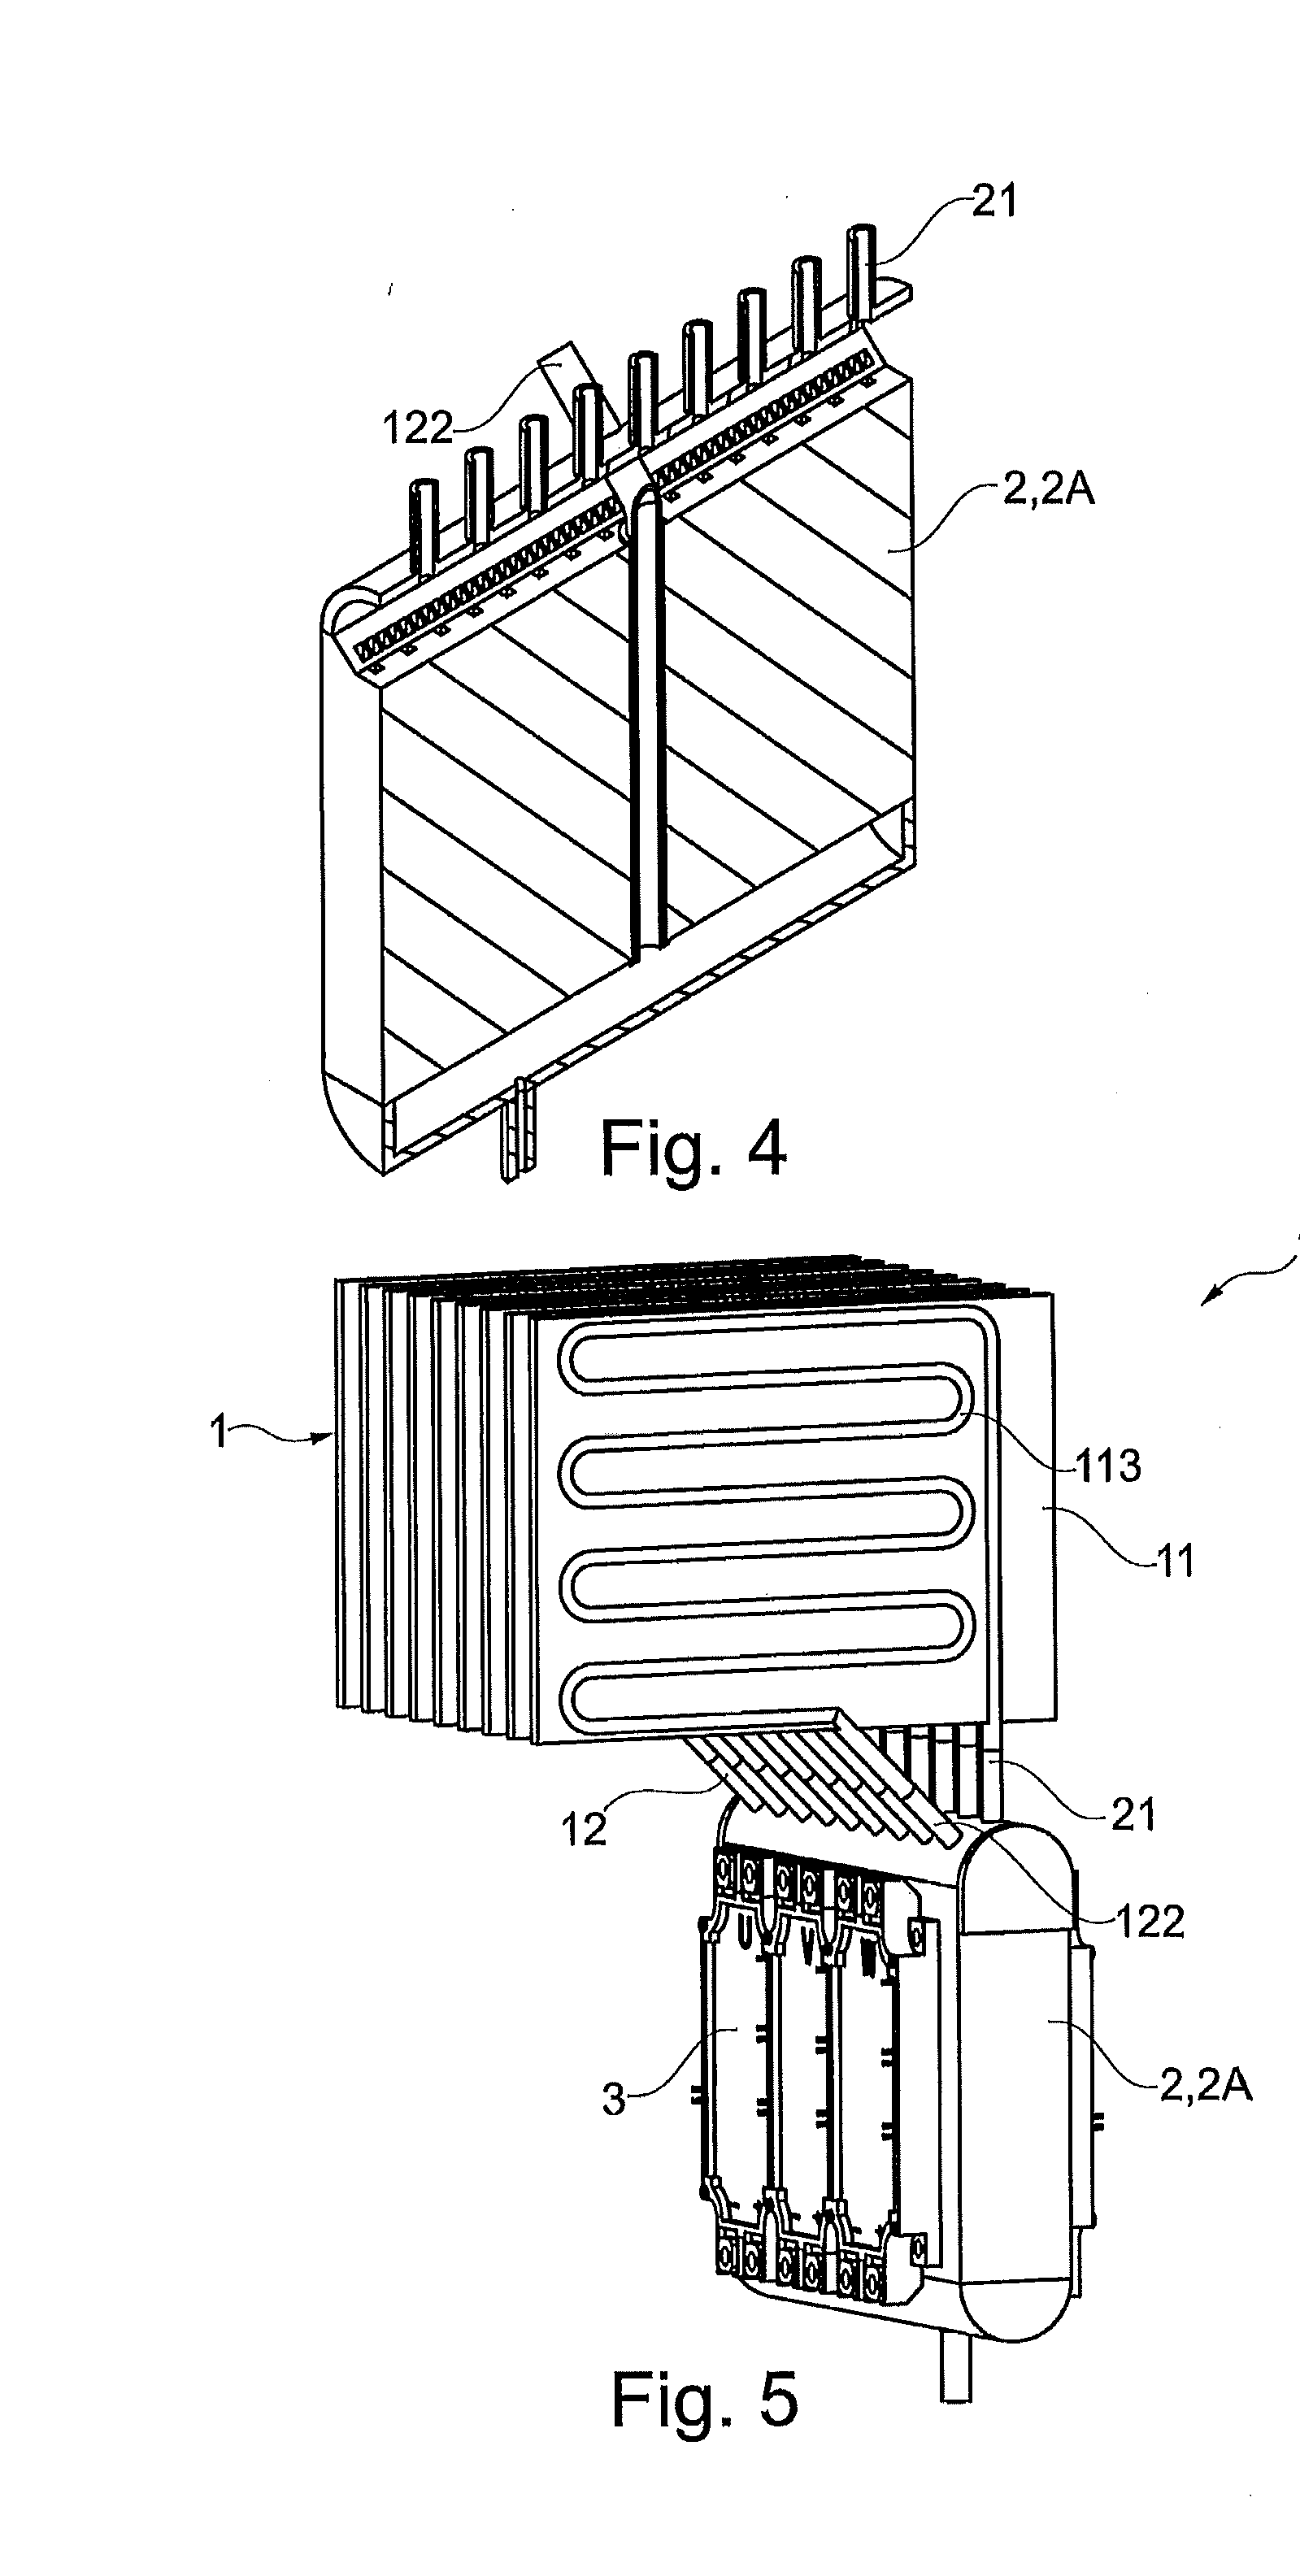 Cooling module for cooling electronic components